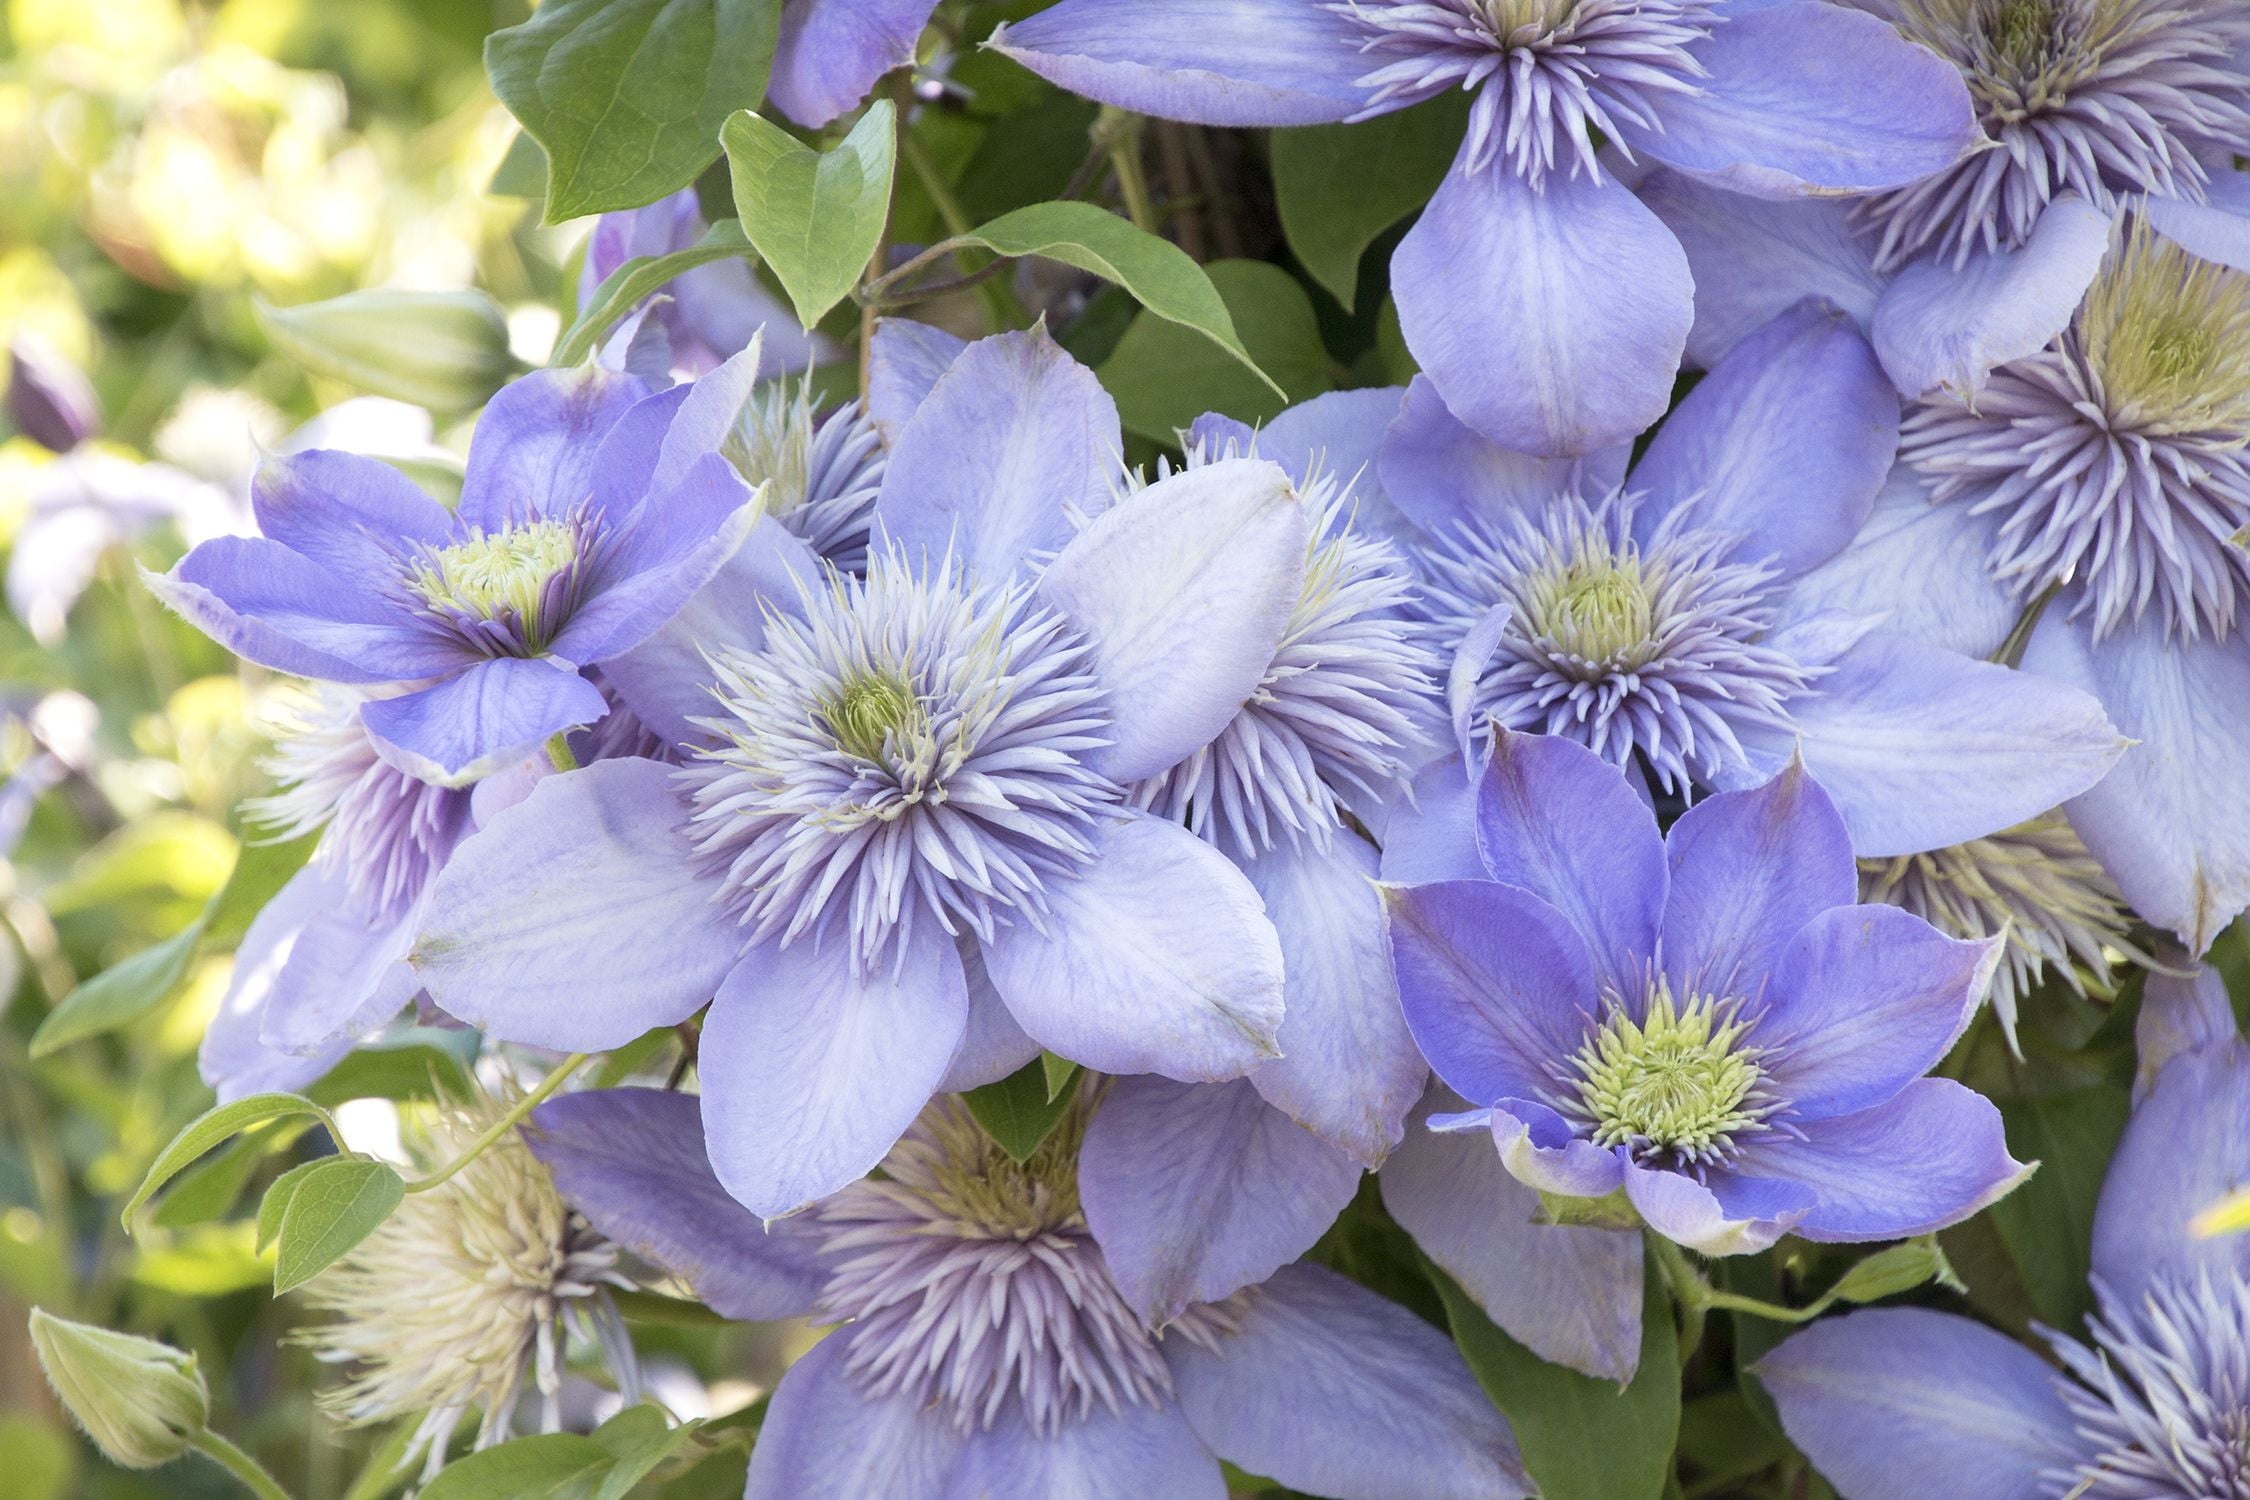 Clematis Blue Light - Live in 4 inch Growers Pot - Clematis 'Vanso' - Starter Plants Ready for The Garden - Beautiful Violet Blue Flowering Vine - Walmart.com